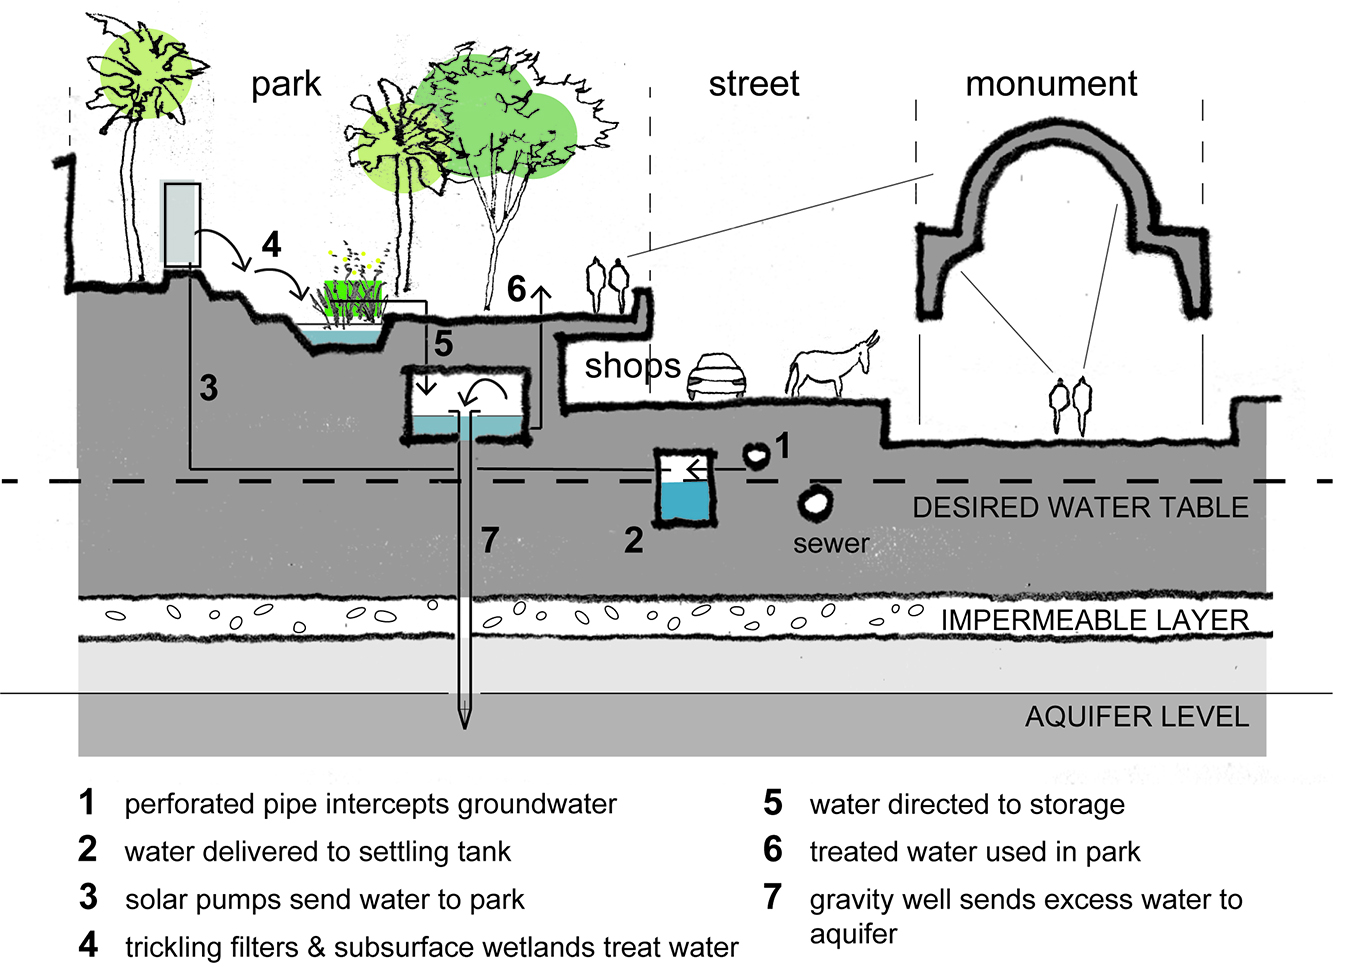 water schematic for park in Cairo, Egypt